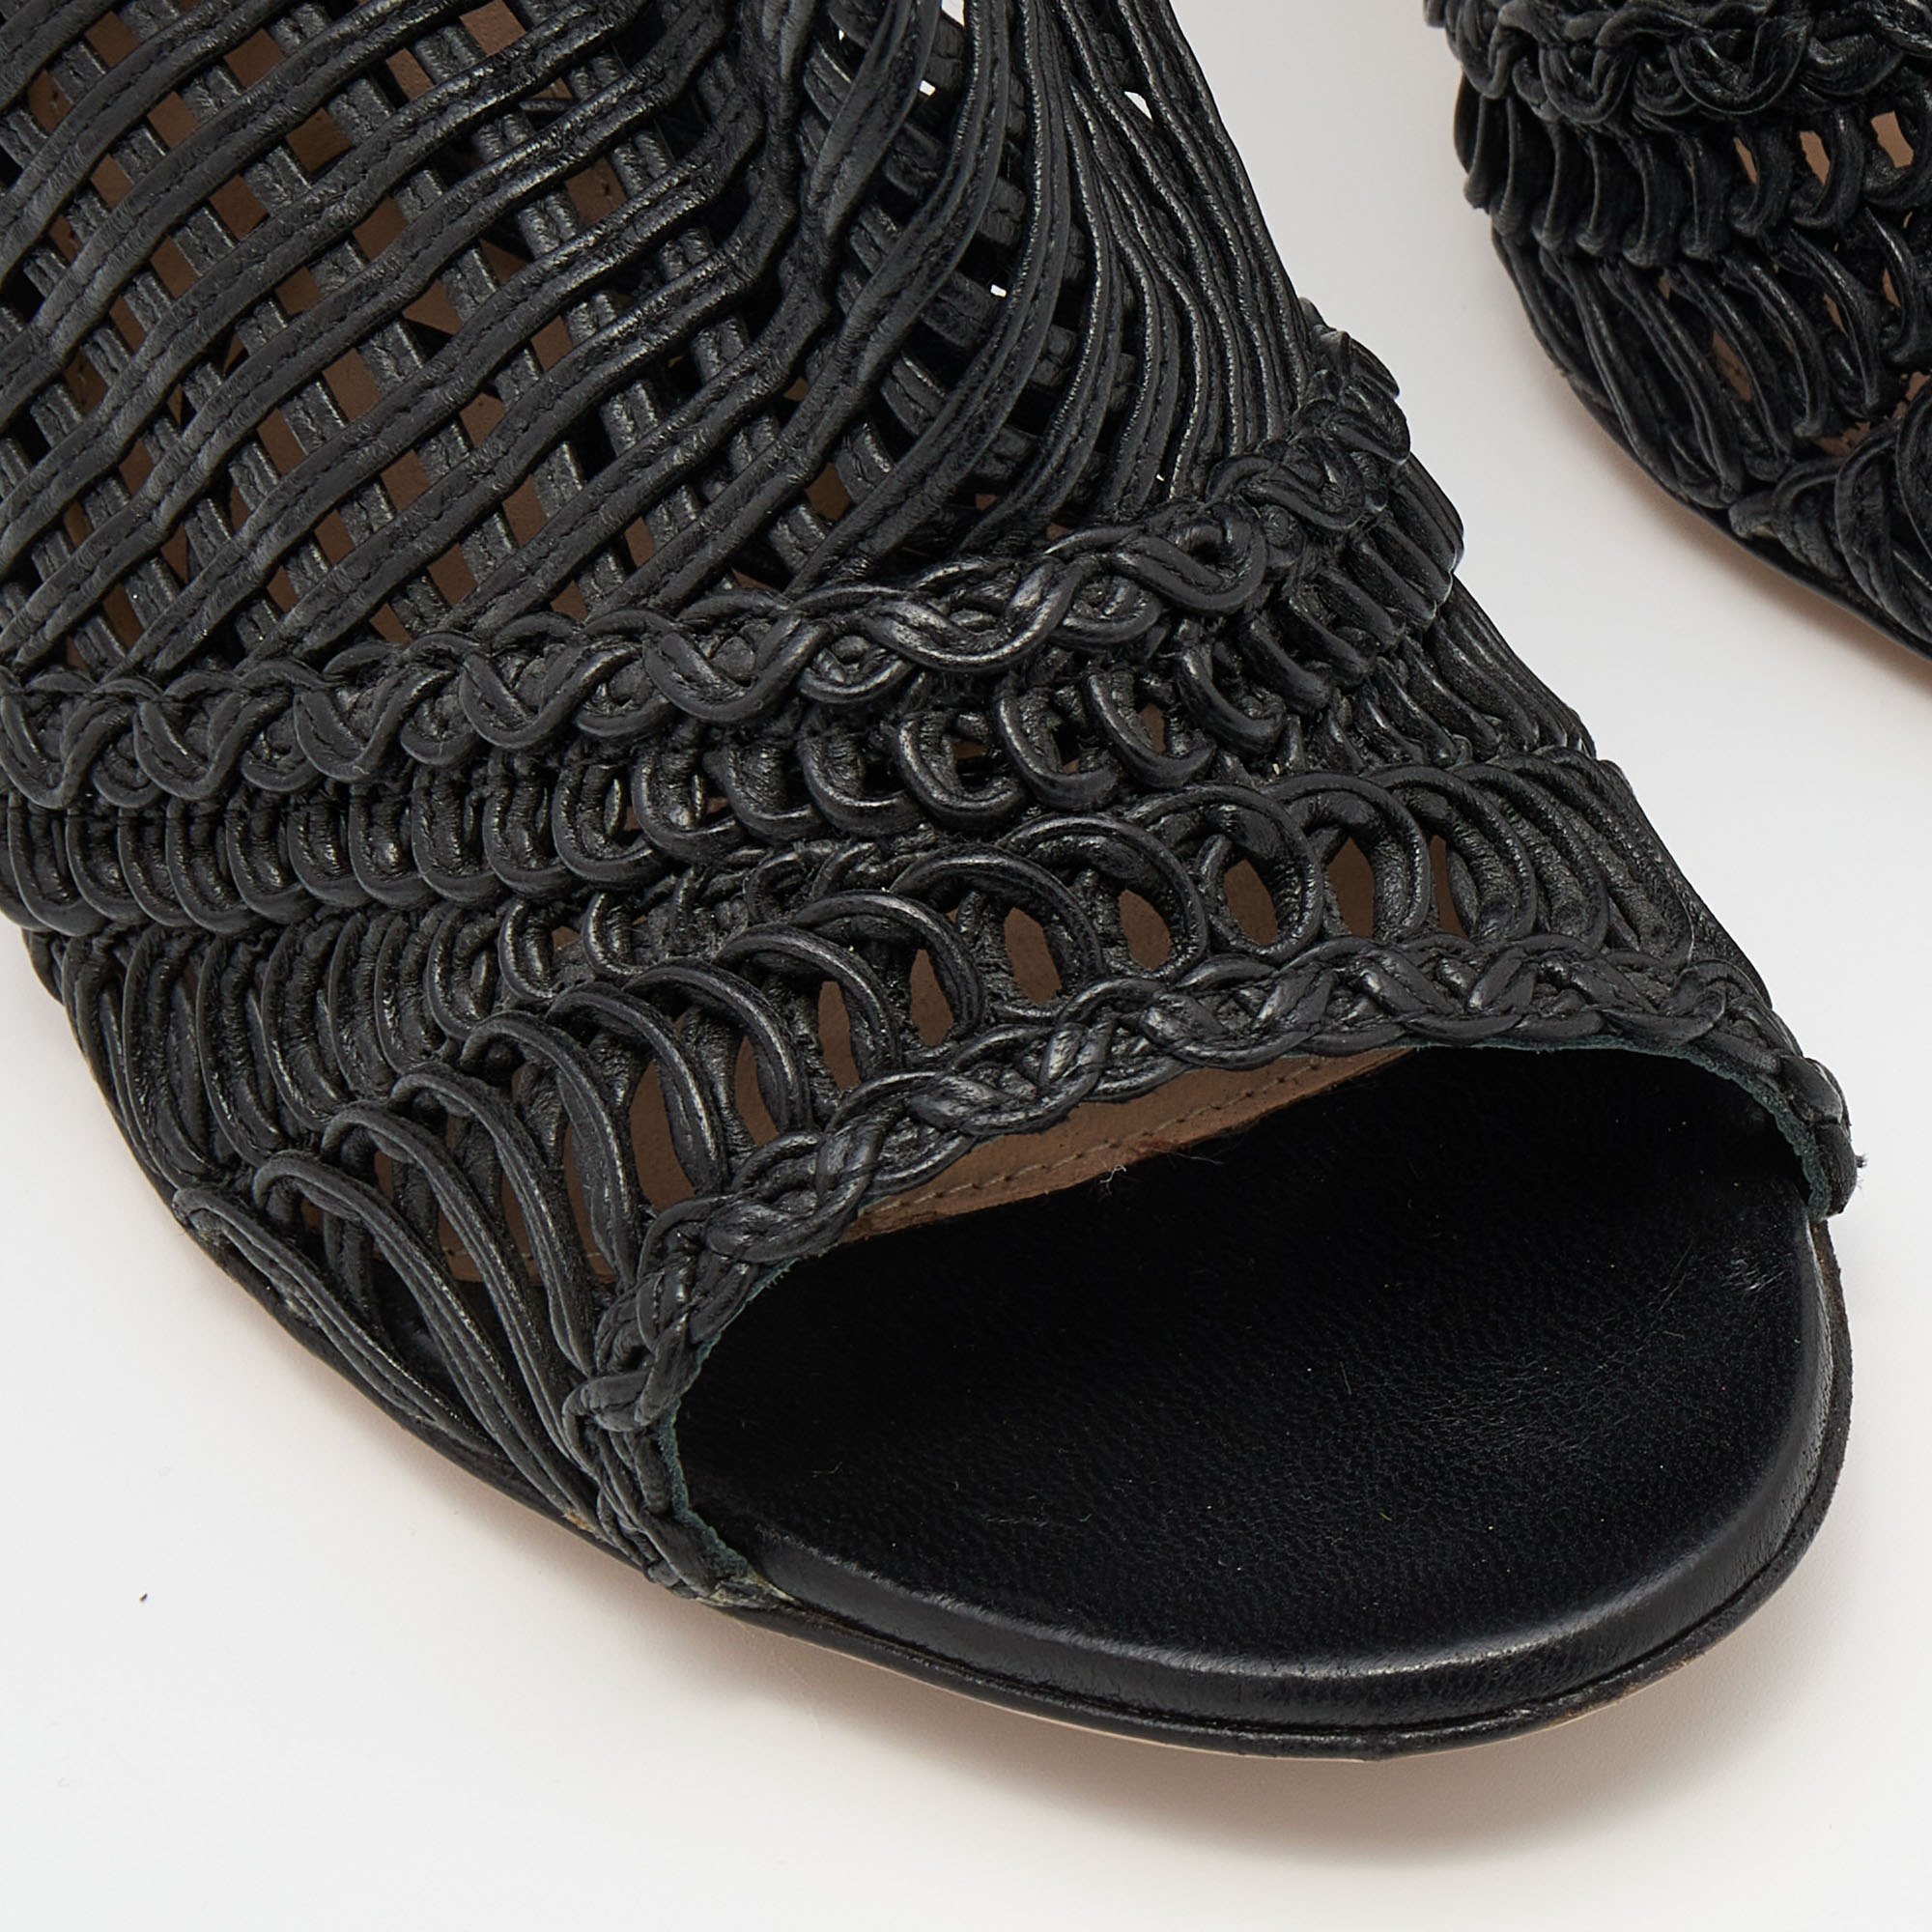 Gianvito Rossi Black Woven Leather Ankle Tie Sandals Size 38